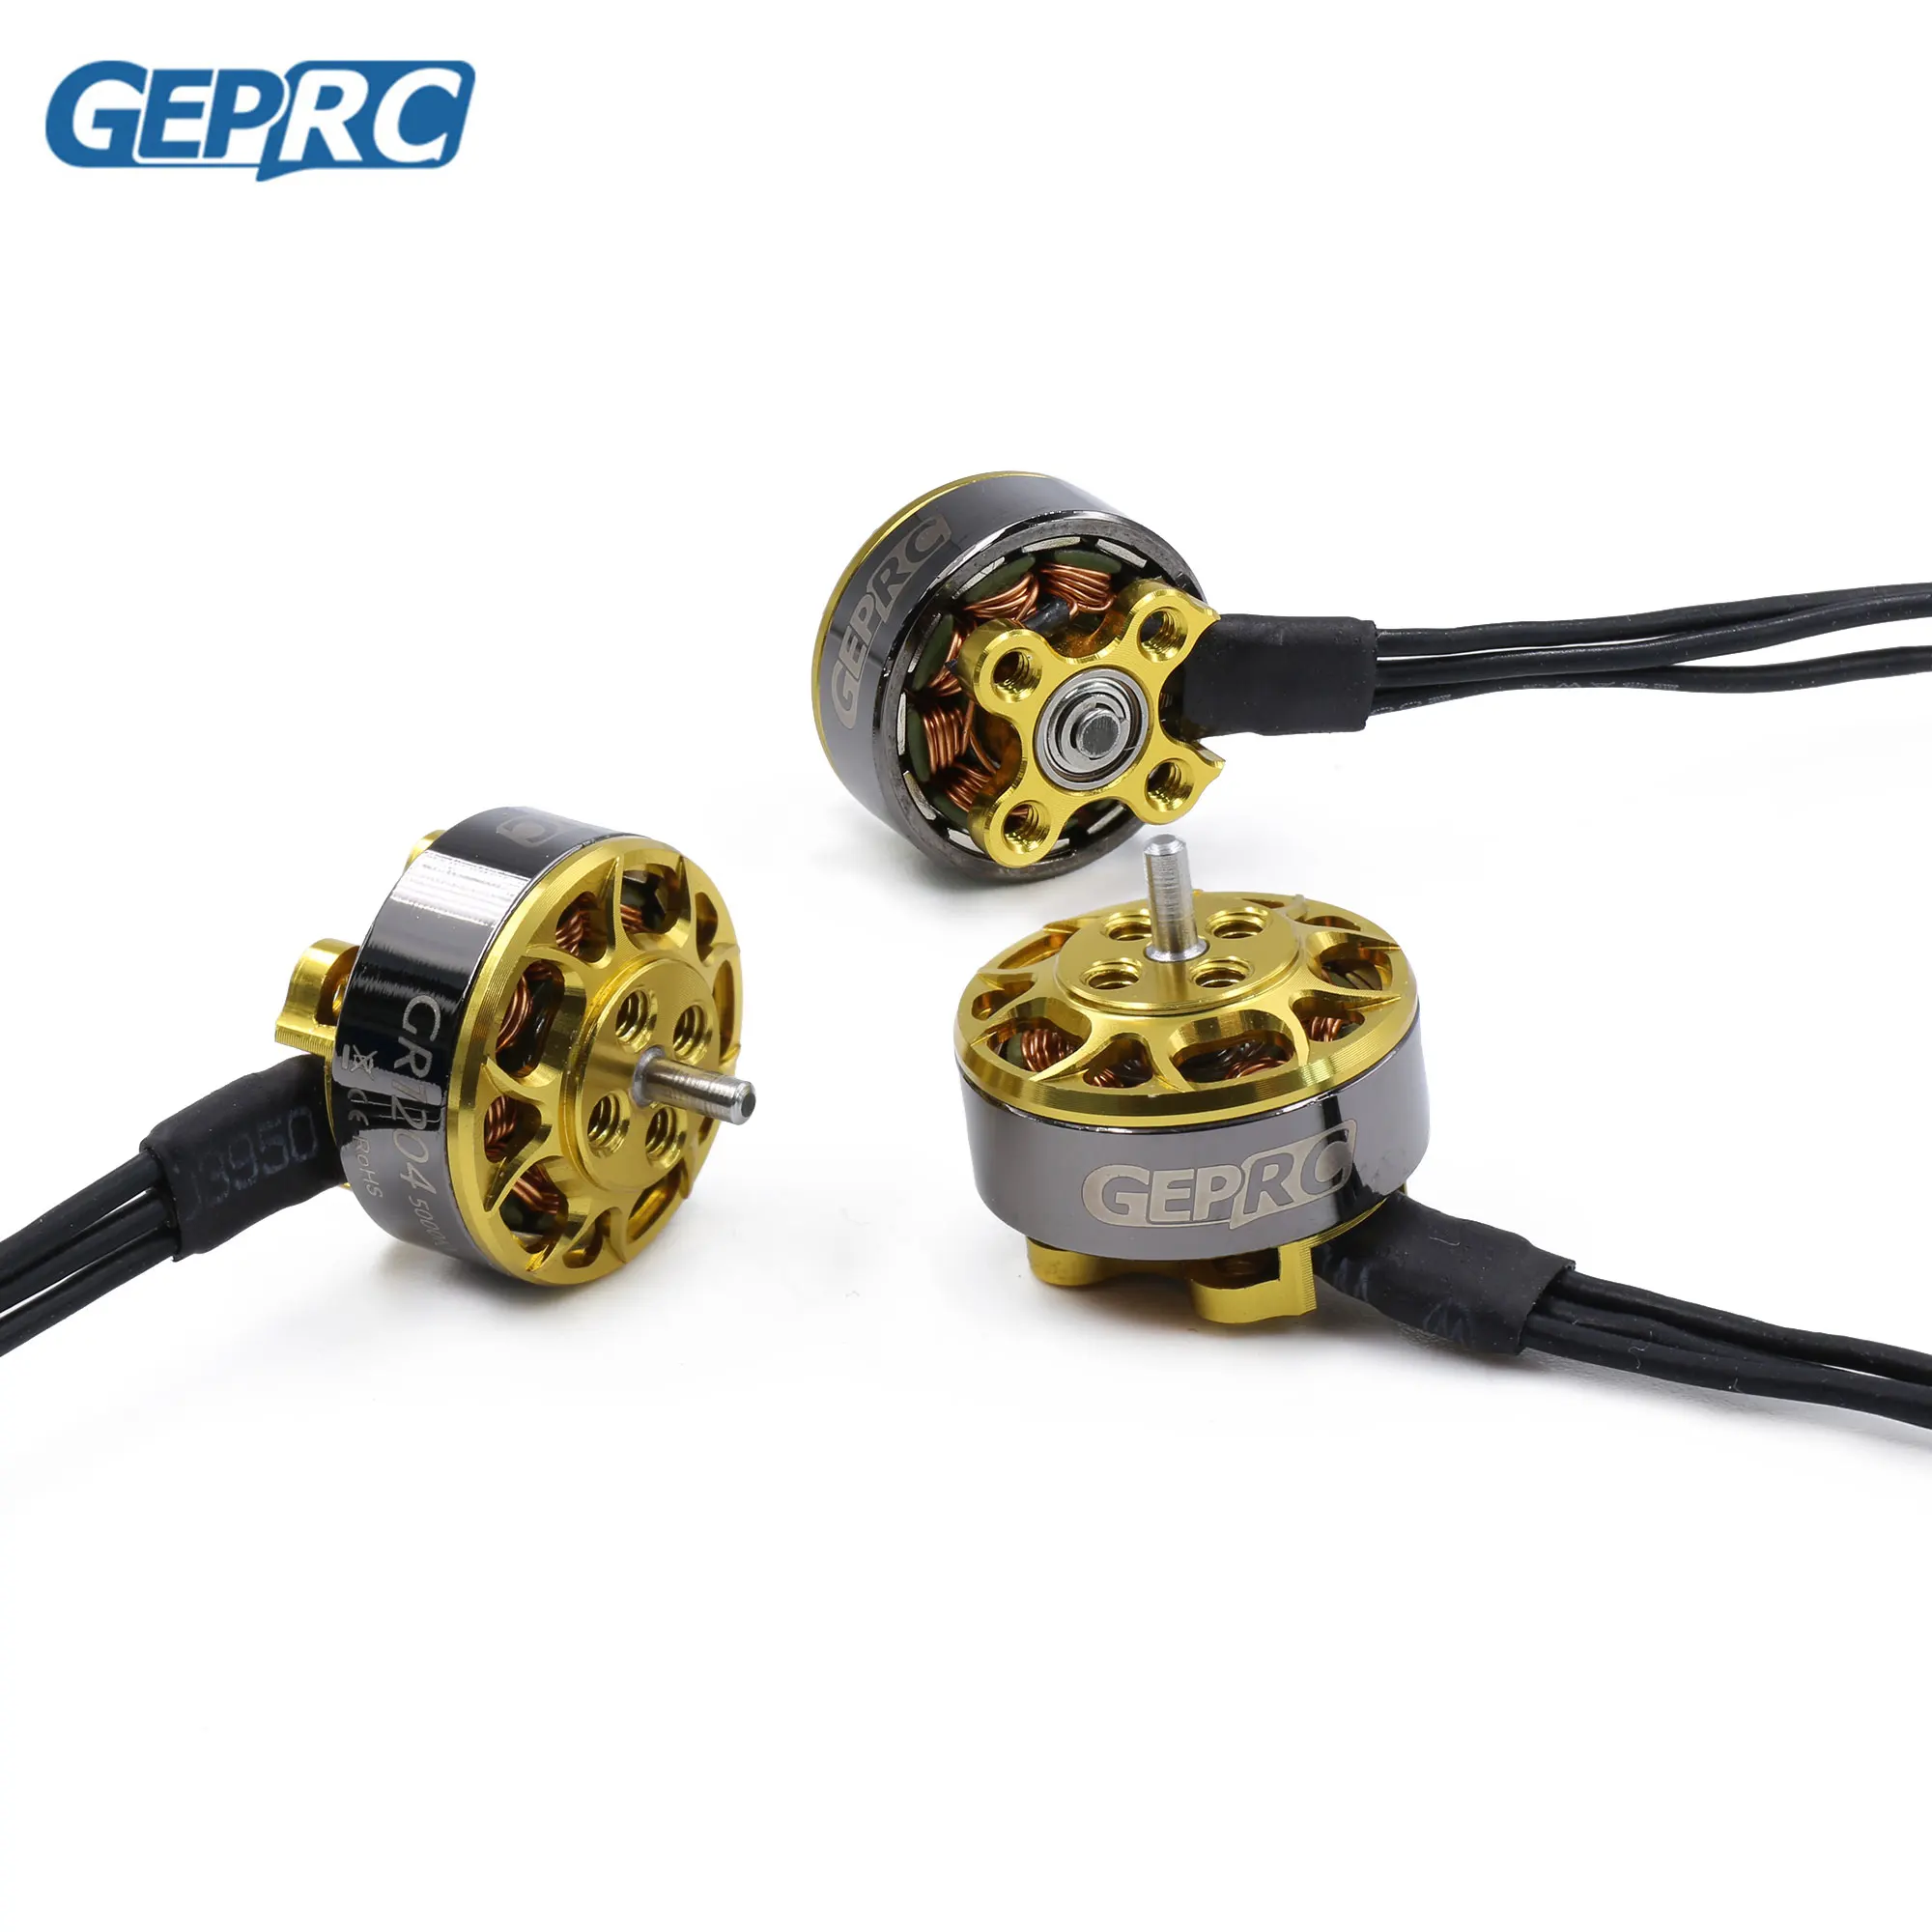 GEPRC GEP-GR1204 1204 5000kv Brushless Motor High Quality For RC DIY FPV Racing Drone